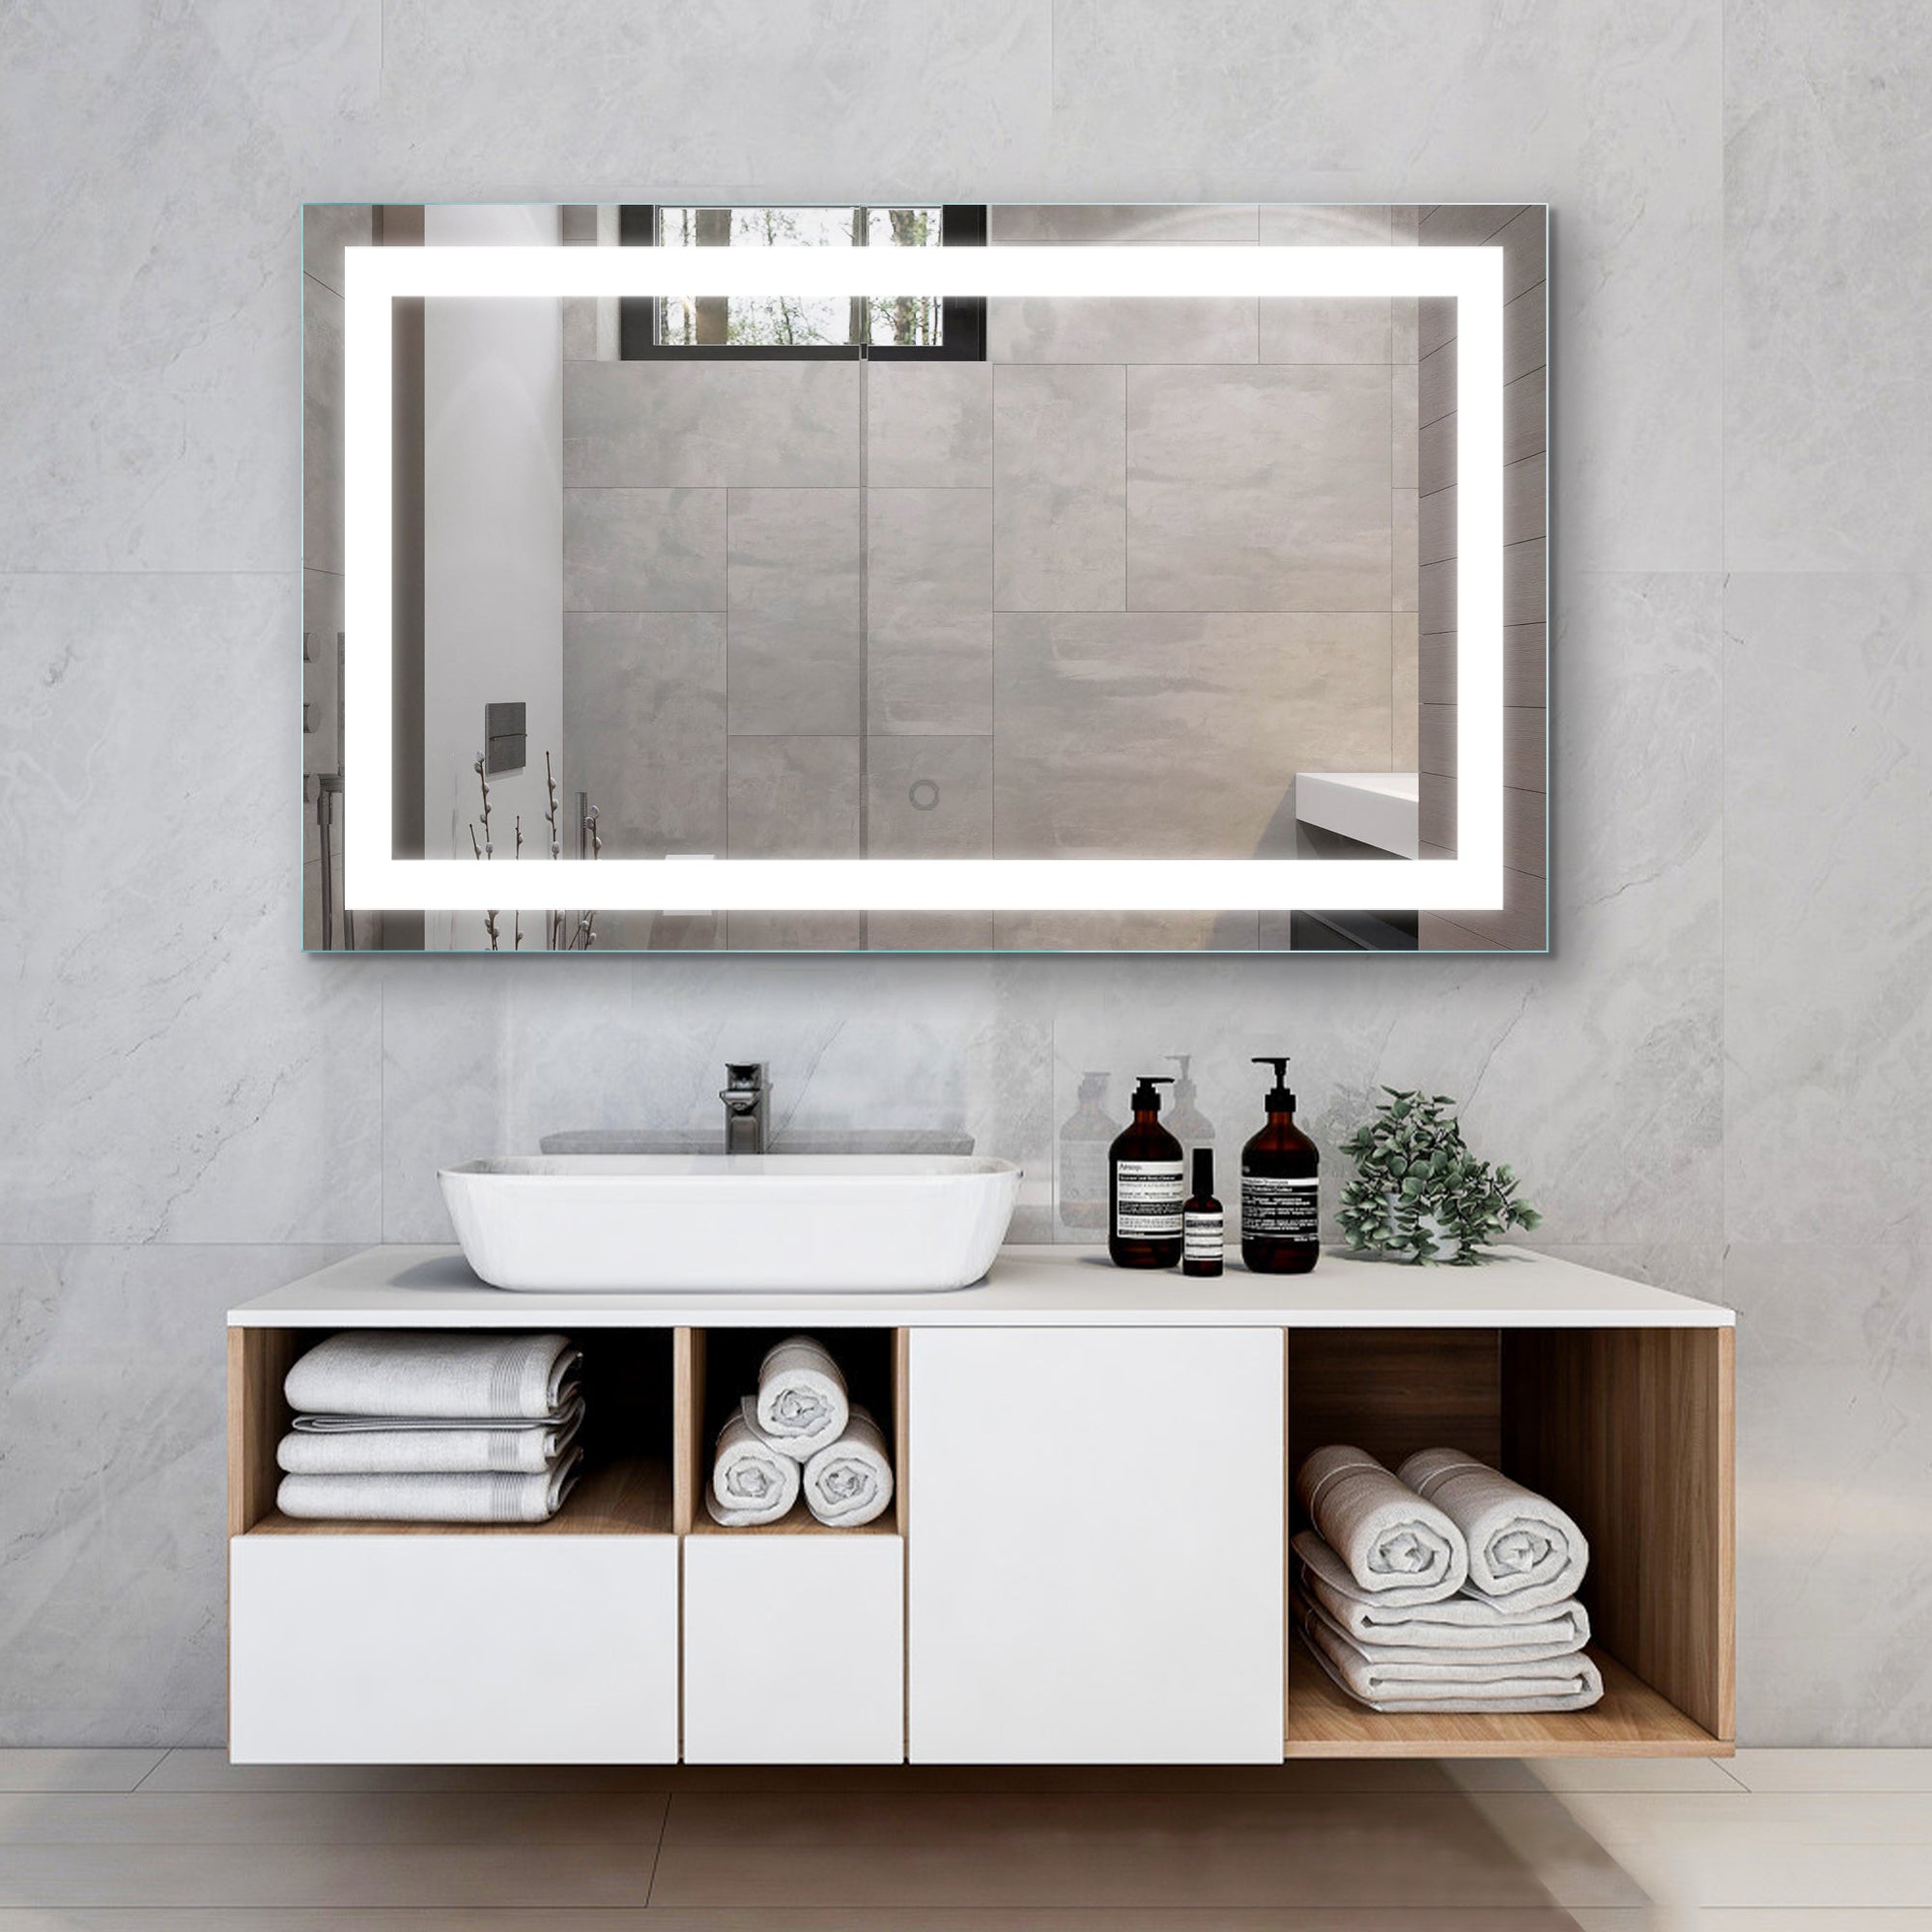 40 x 24 in. LED Lighted Bathroom Wall Mounted Mirror with High Lumen/Anti-Fog Separately Control/Dimmer Function-Boyel Living